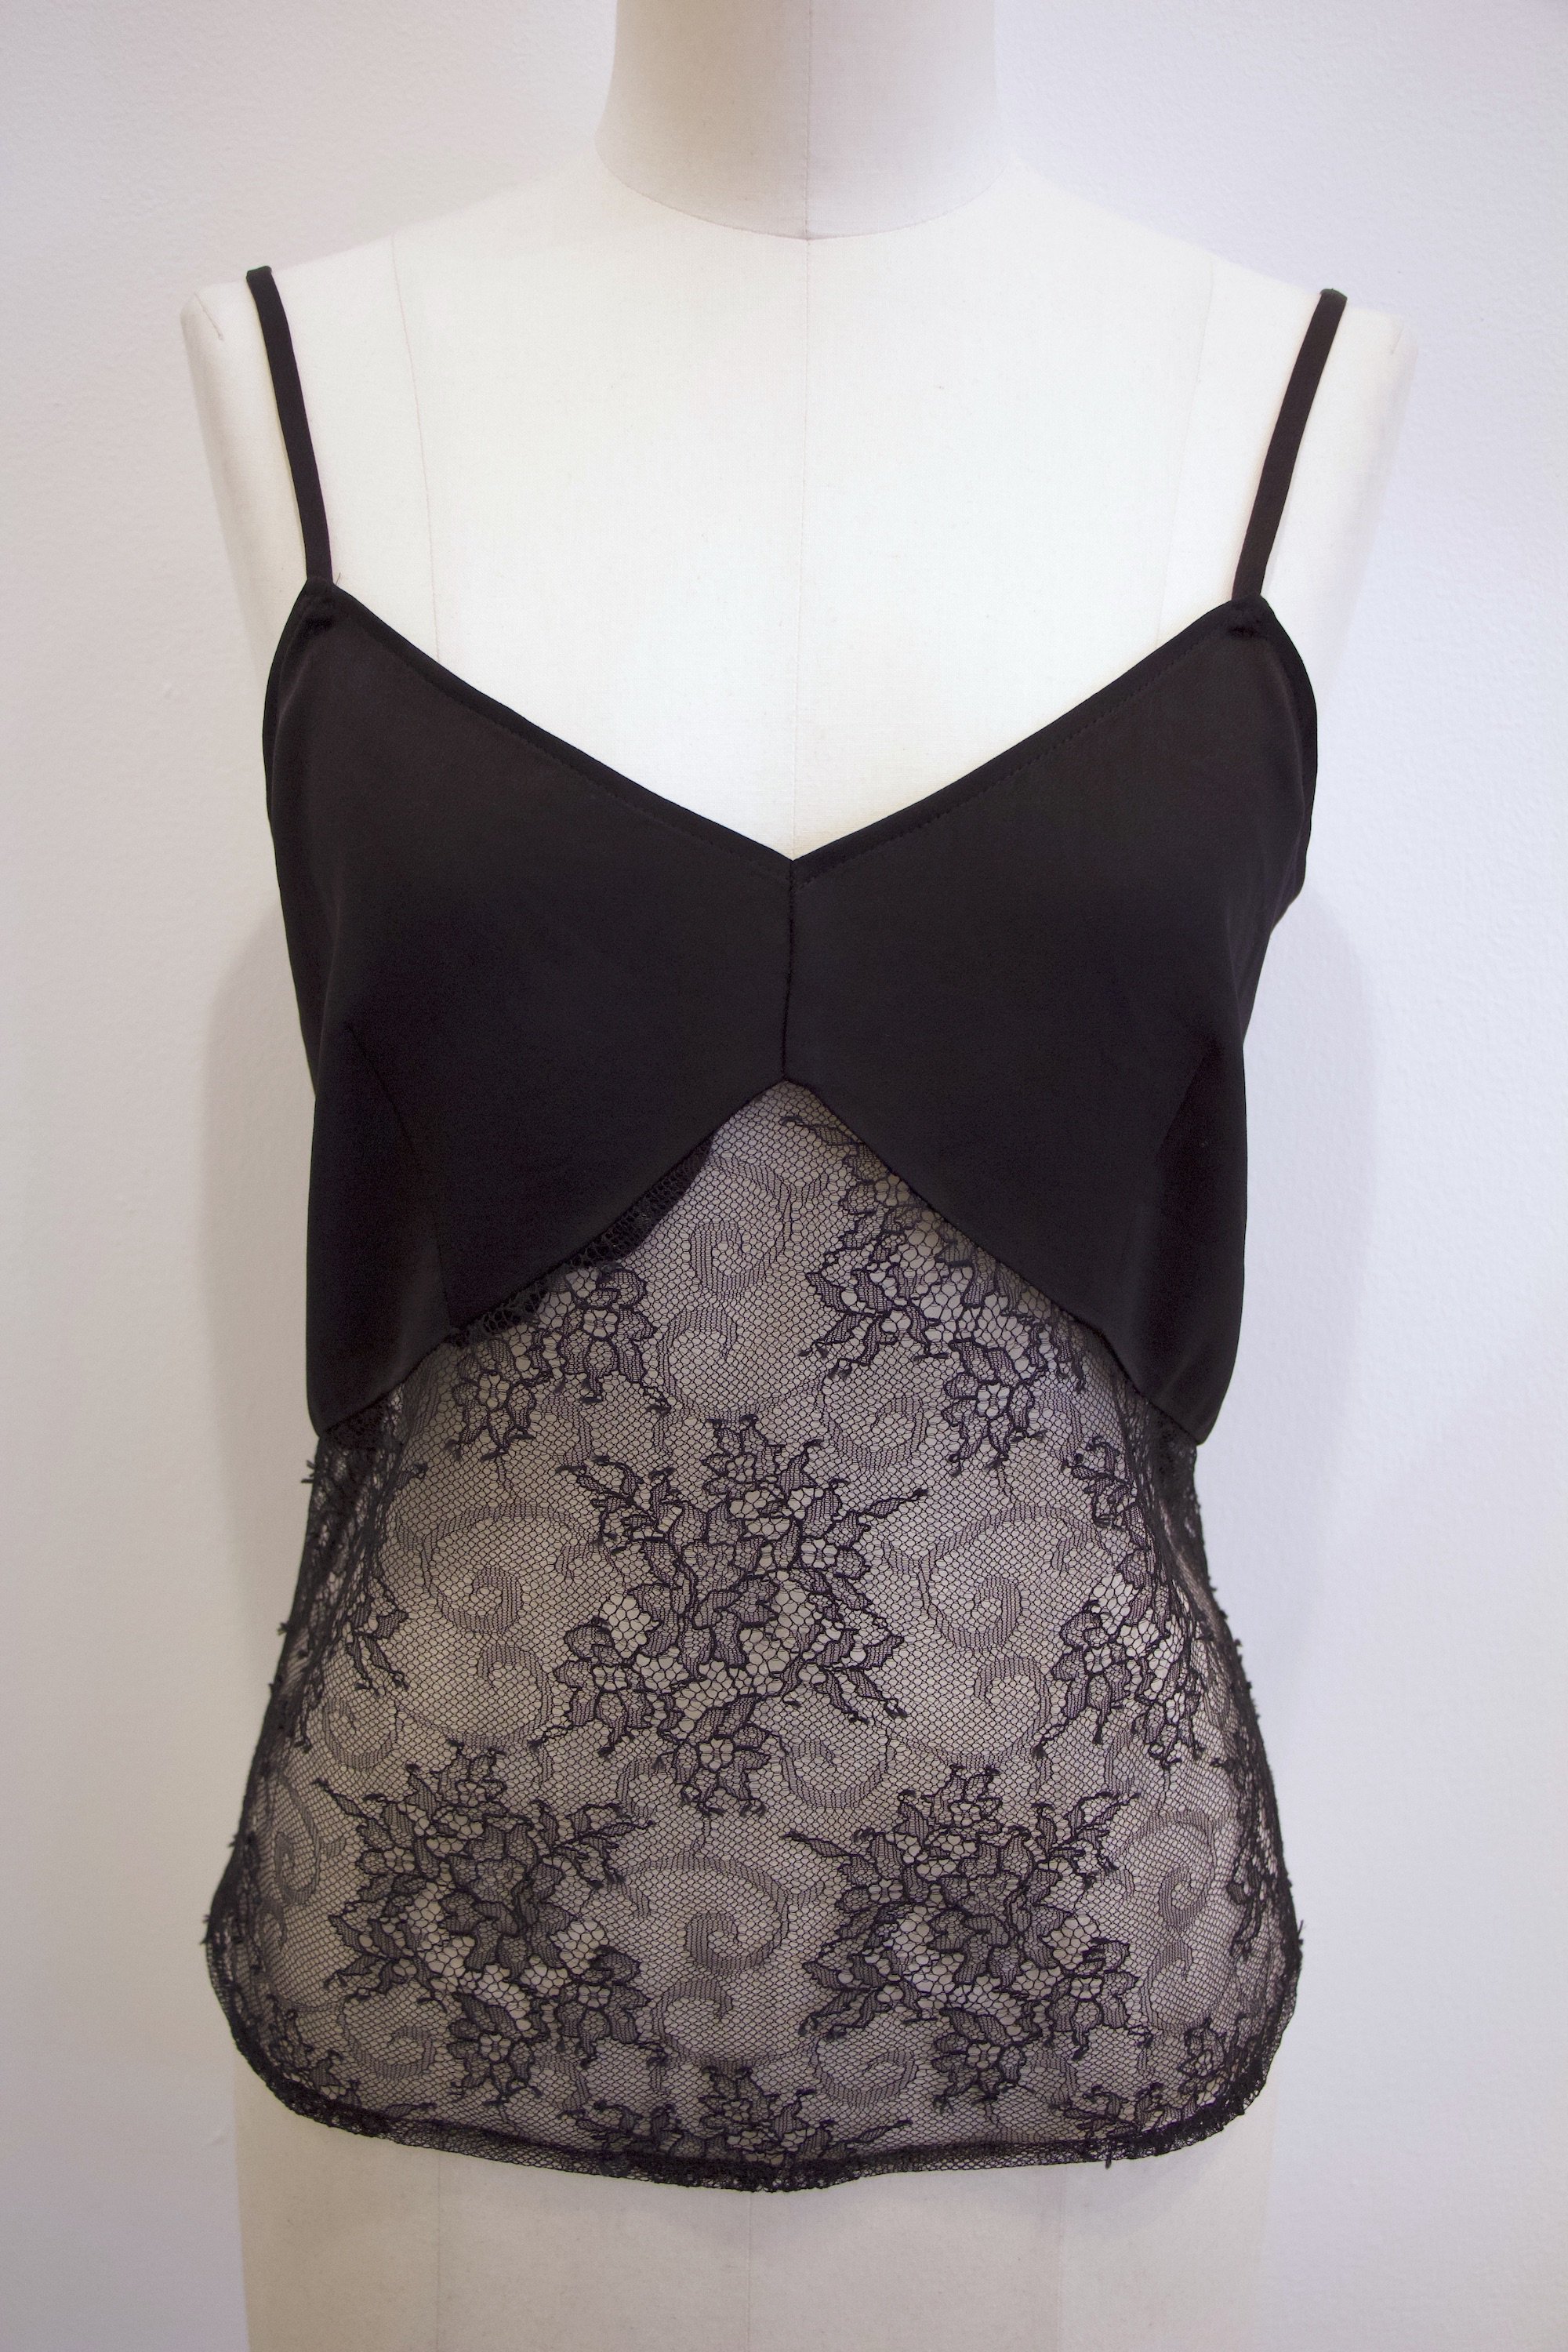 <img class='new_mark_img1' src='https://img.shop-pro.jp/img/new/icons10.gif' style='border:none;display:inline;margin:0px;padding:0px;width:auto;' />f's6 Lace satin camisole / Black